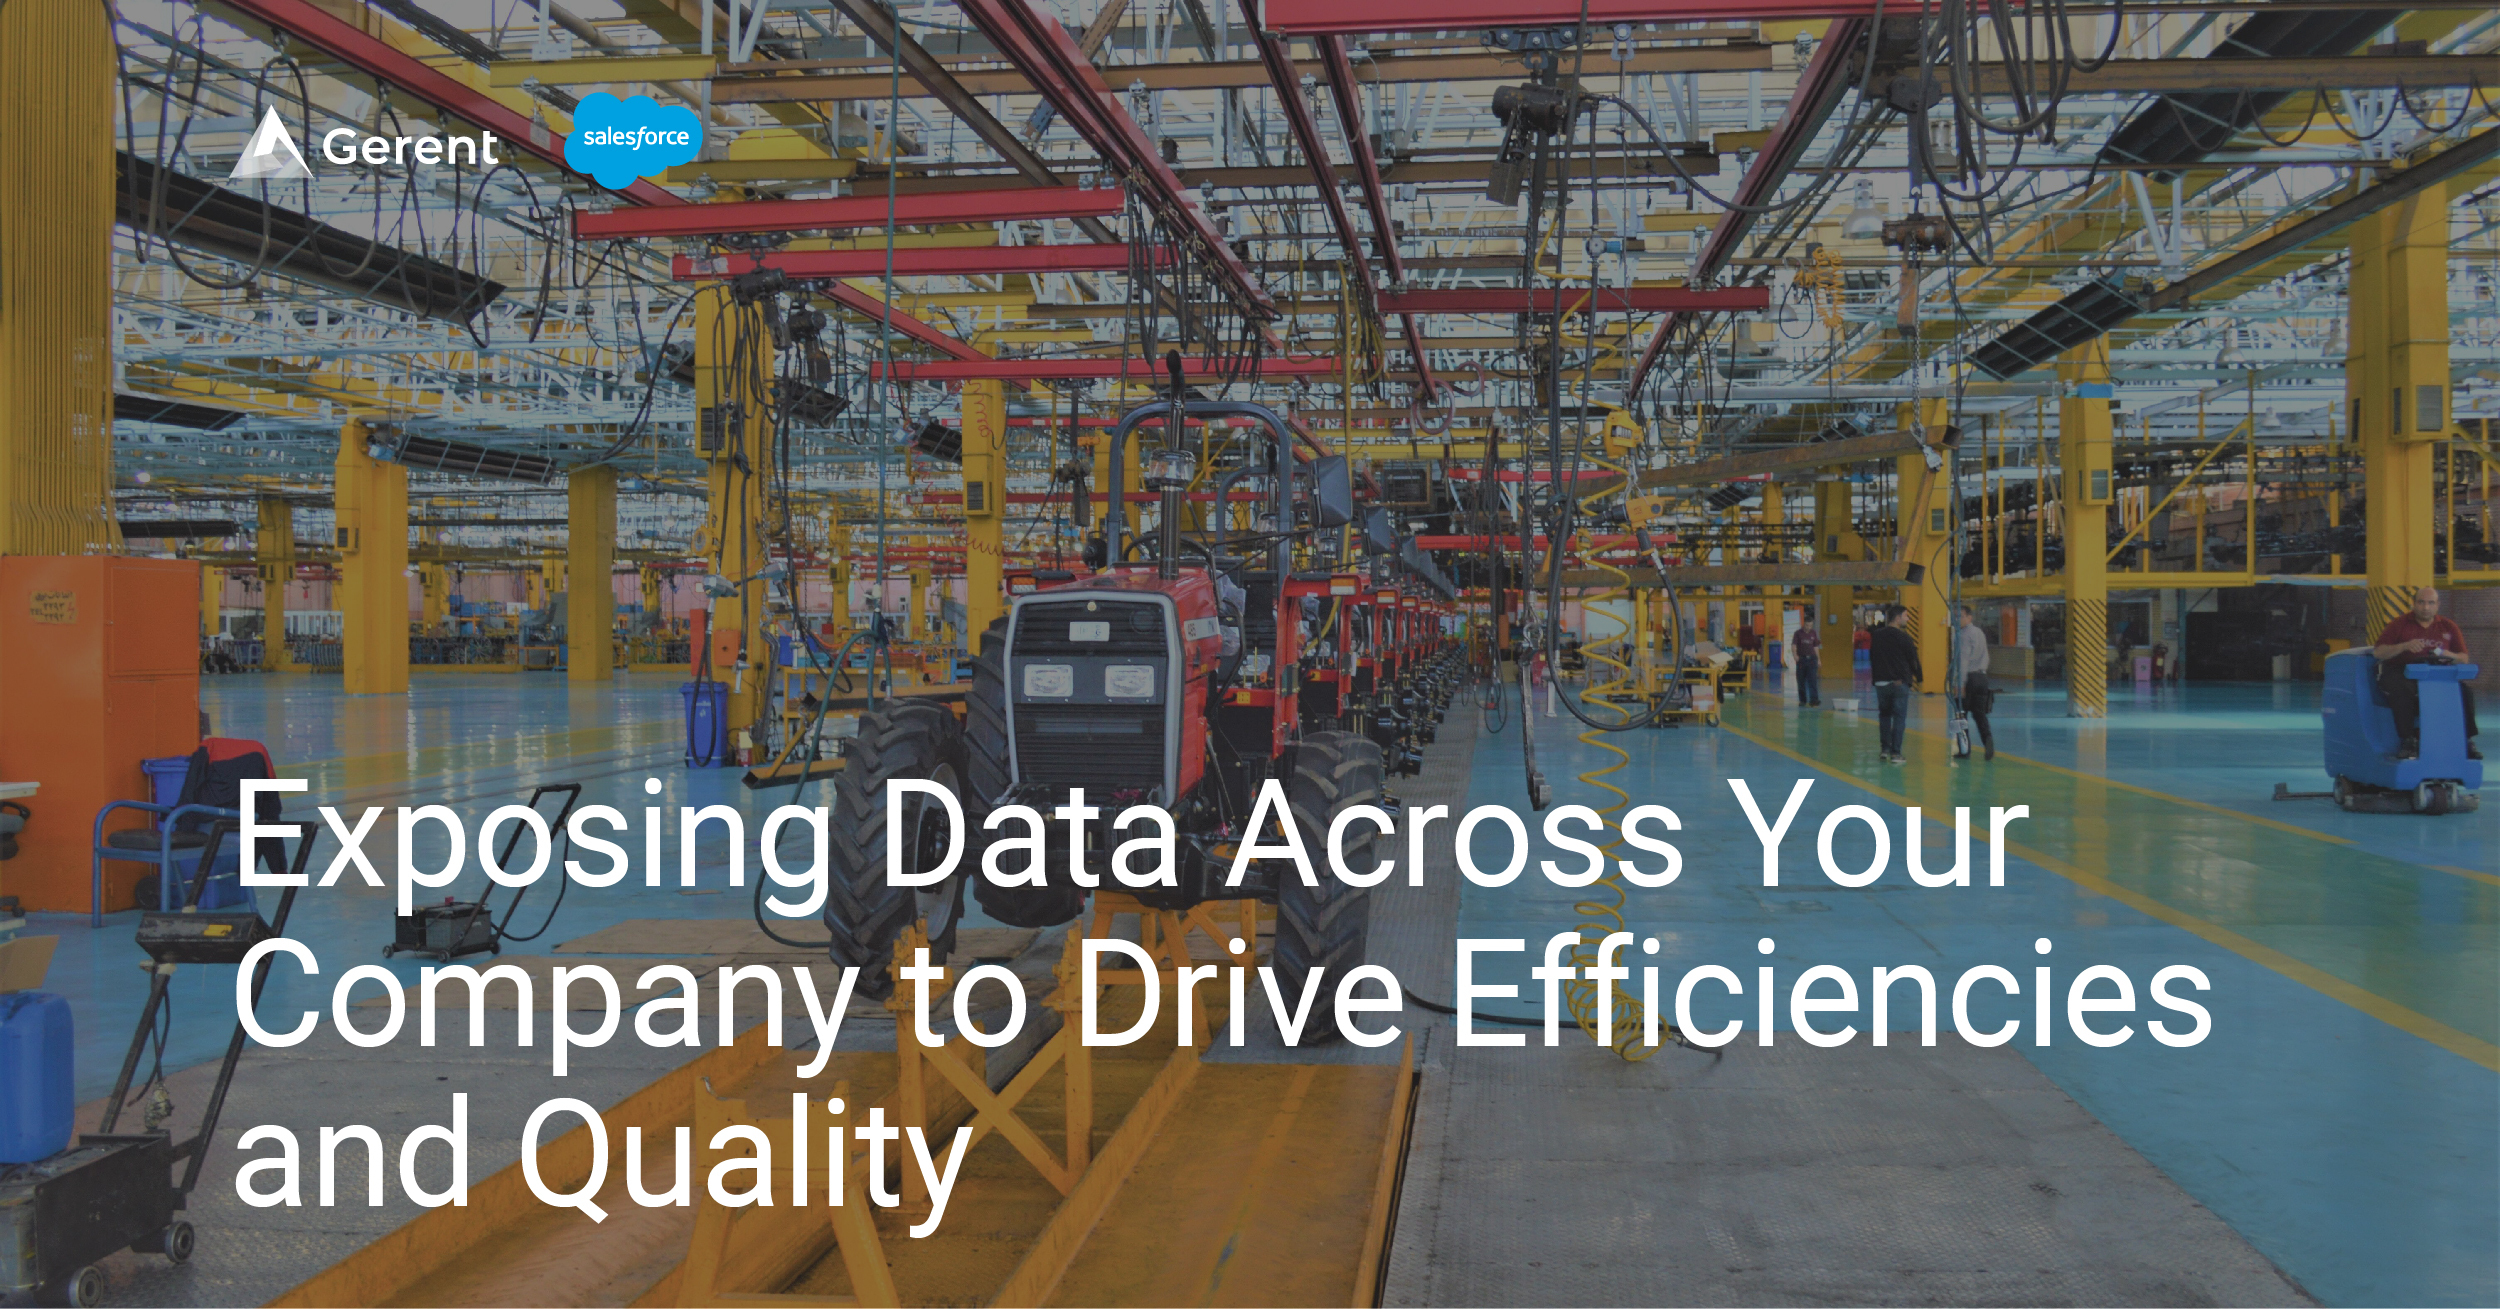 Exposing Data Across Your Company to Drive Efficiencies and Quality